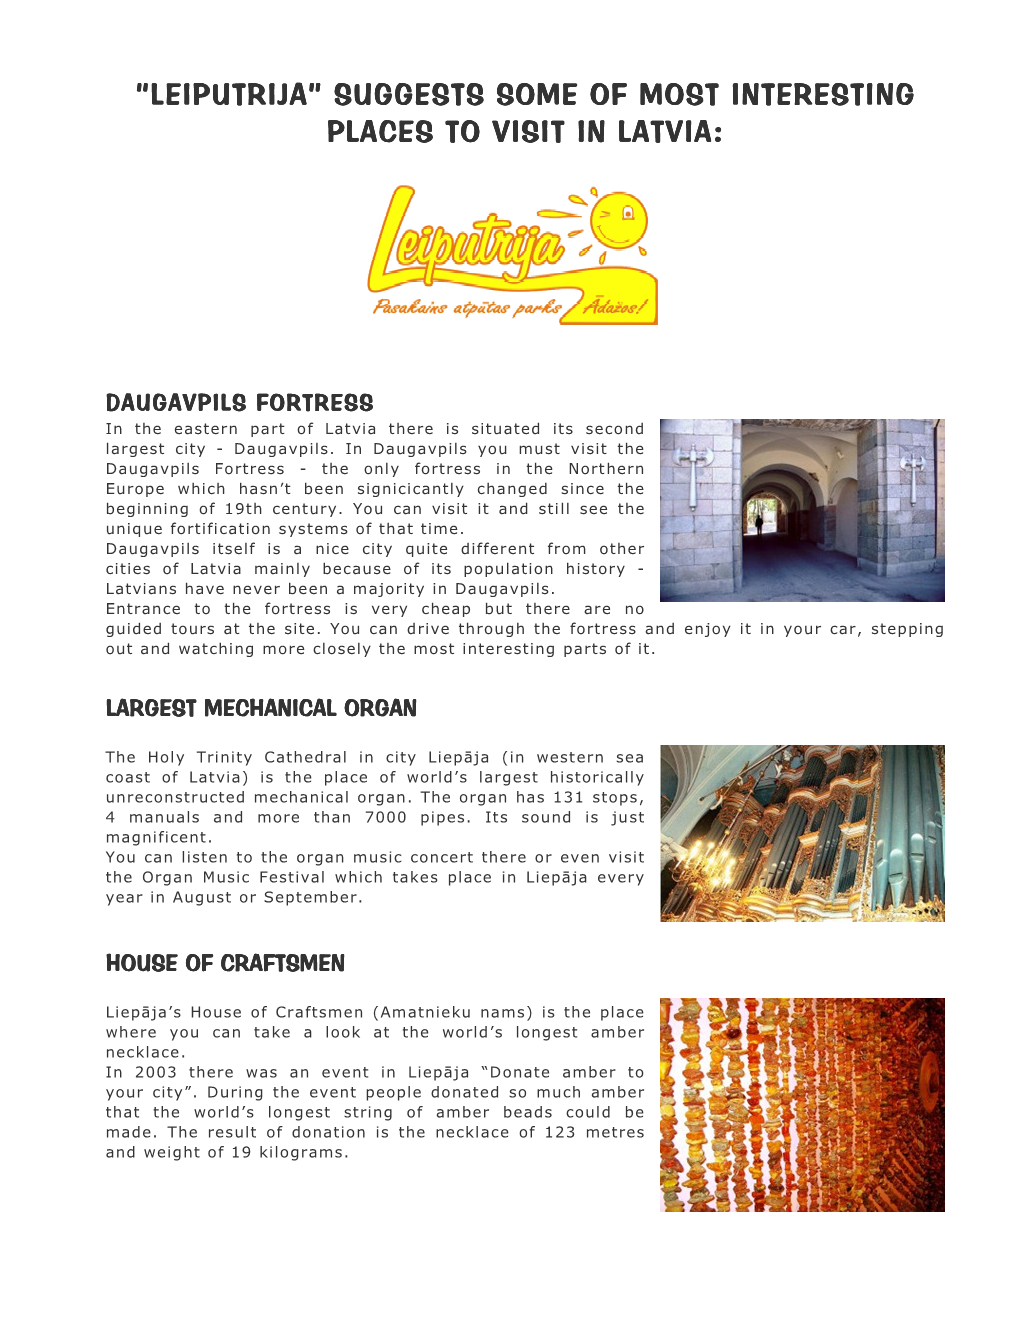 Special Places/Things to See in Latvia (Pdf)